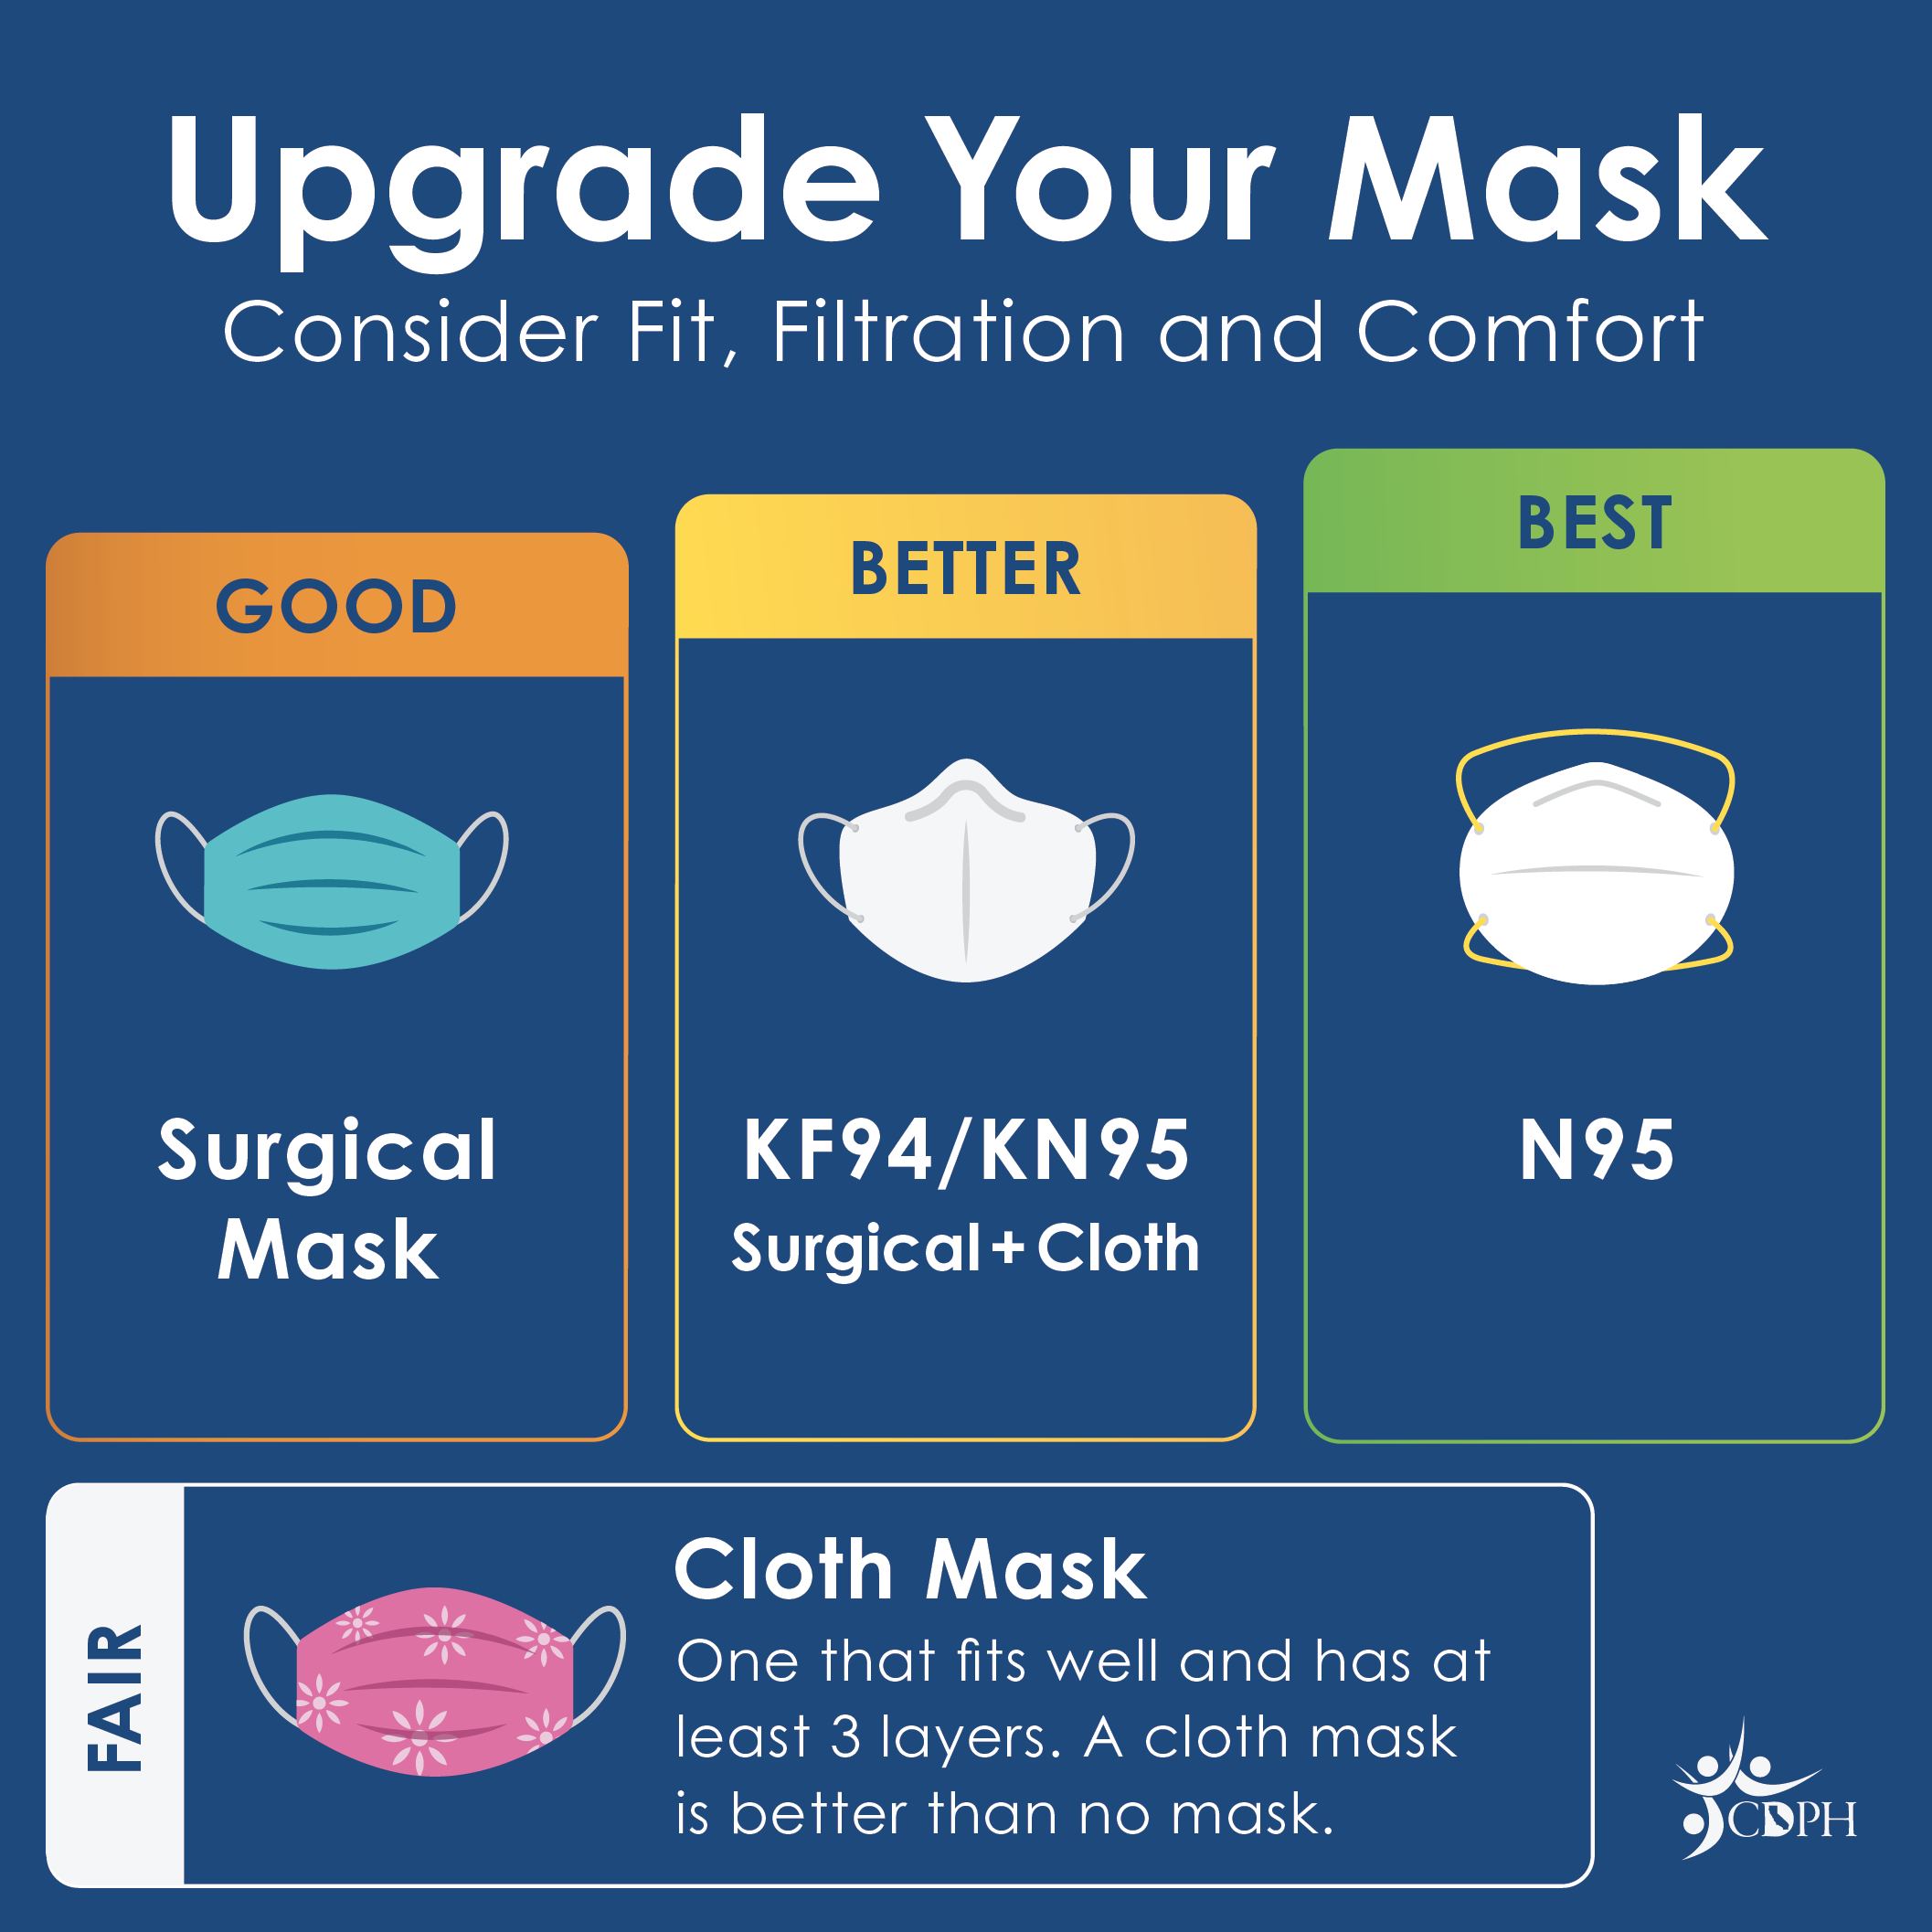 A surgical mask is good, KF94/95 is better, and N95 is best.